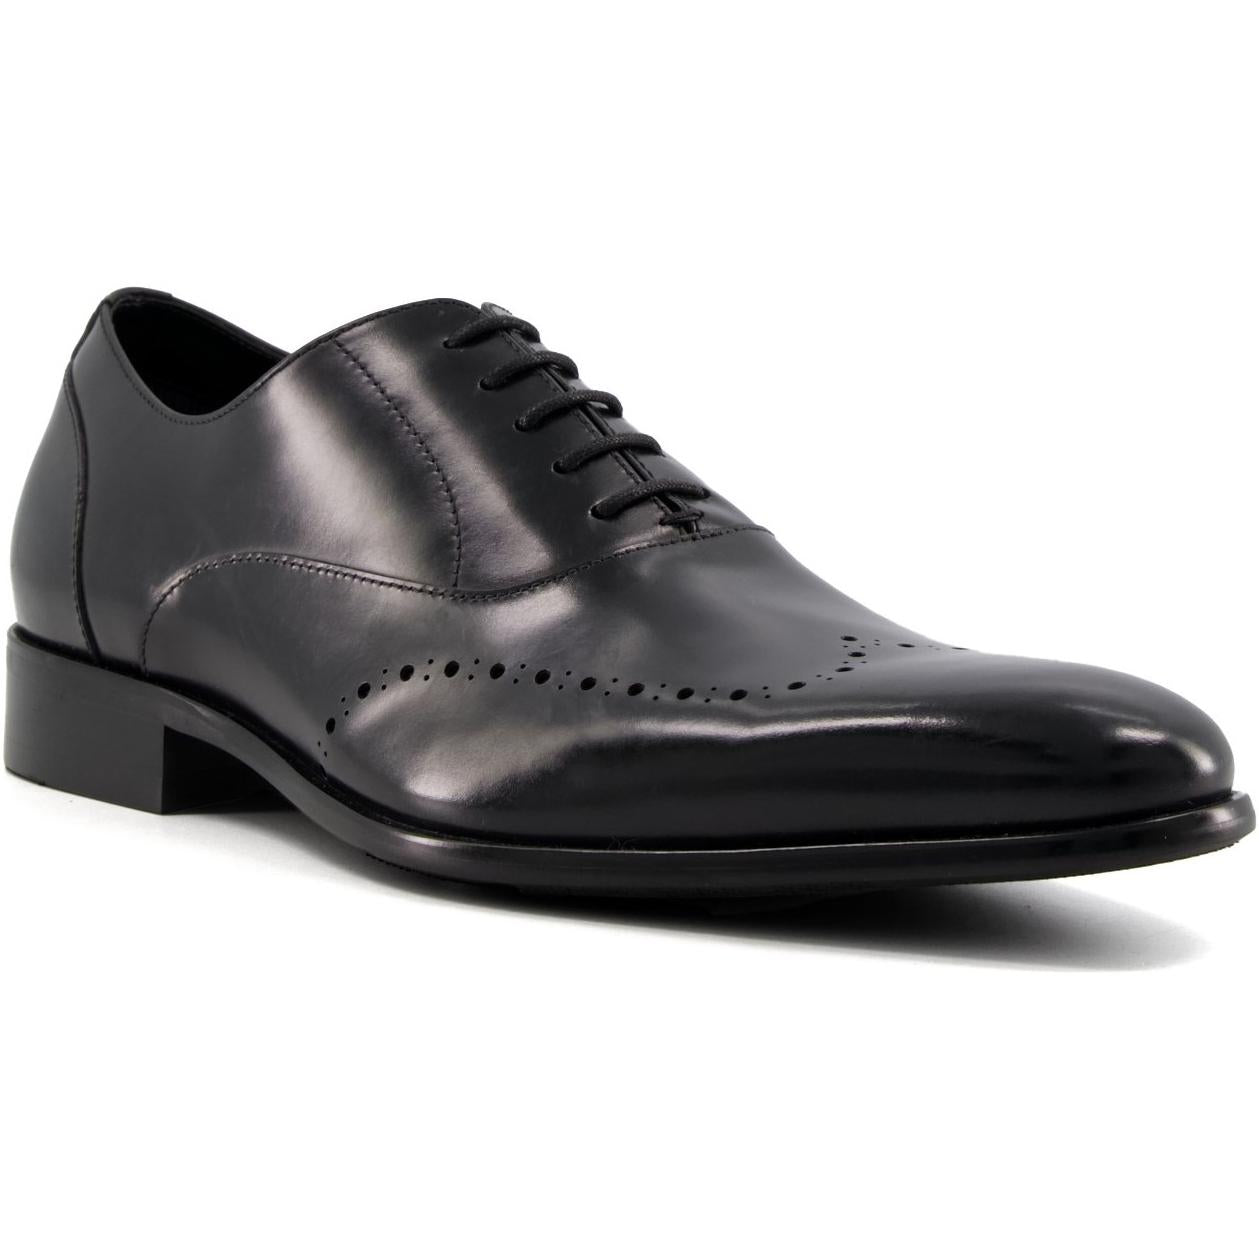 Dune Sycon Oxford Shoes